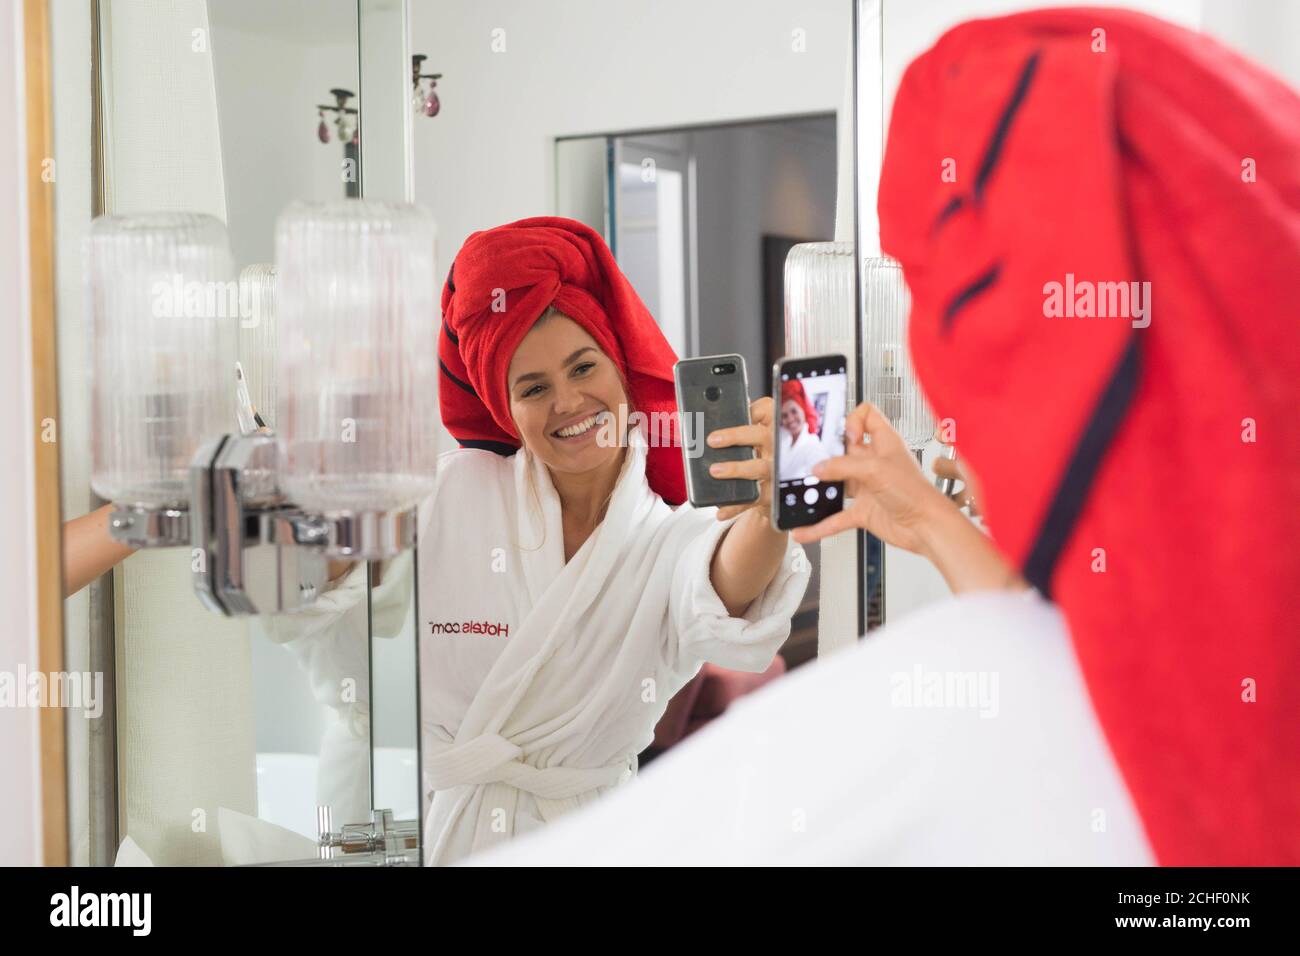 Social influencer Mollie Bylett, known online as ???Where???s Mollie???, takes a bathroom selfie at the Mandrake Hotel in London on behalf of Hotels.com to celebrate National Selfie Day, which is on June 21. Stock Photo